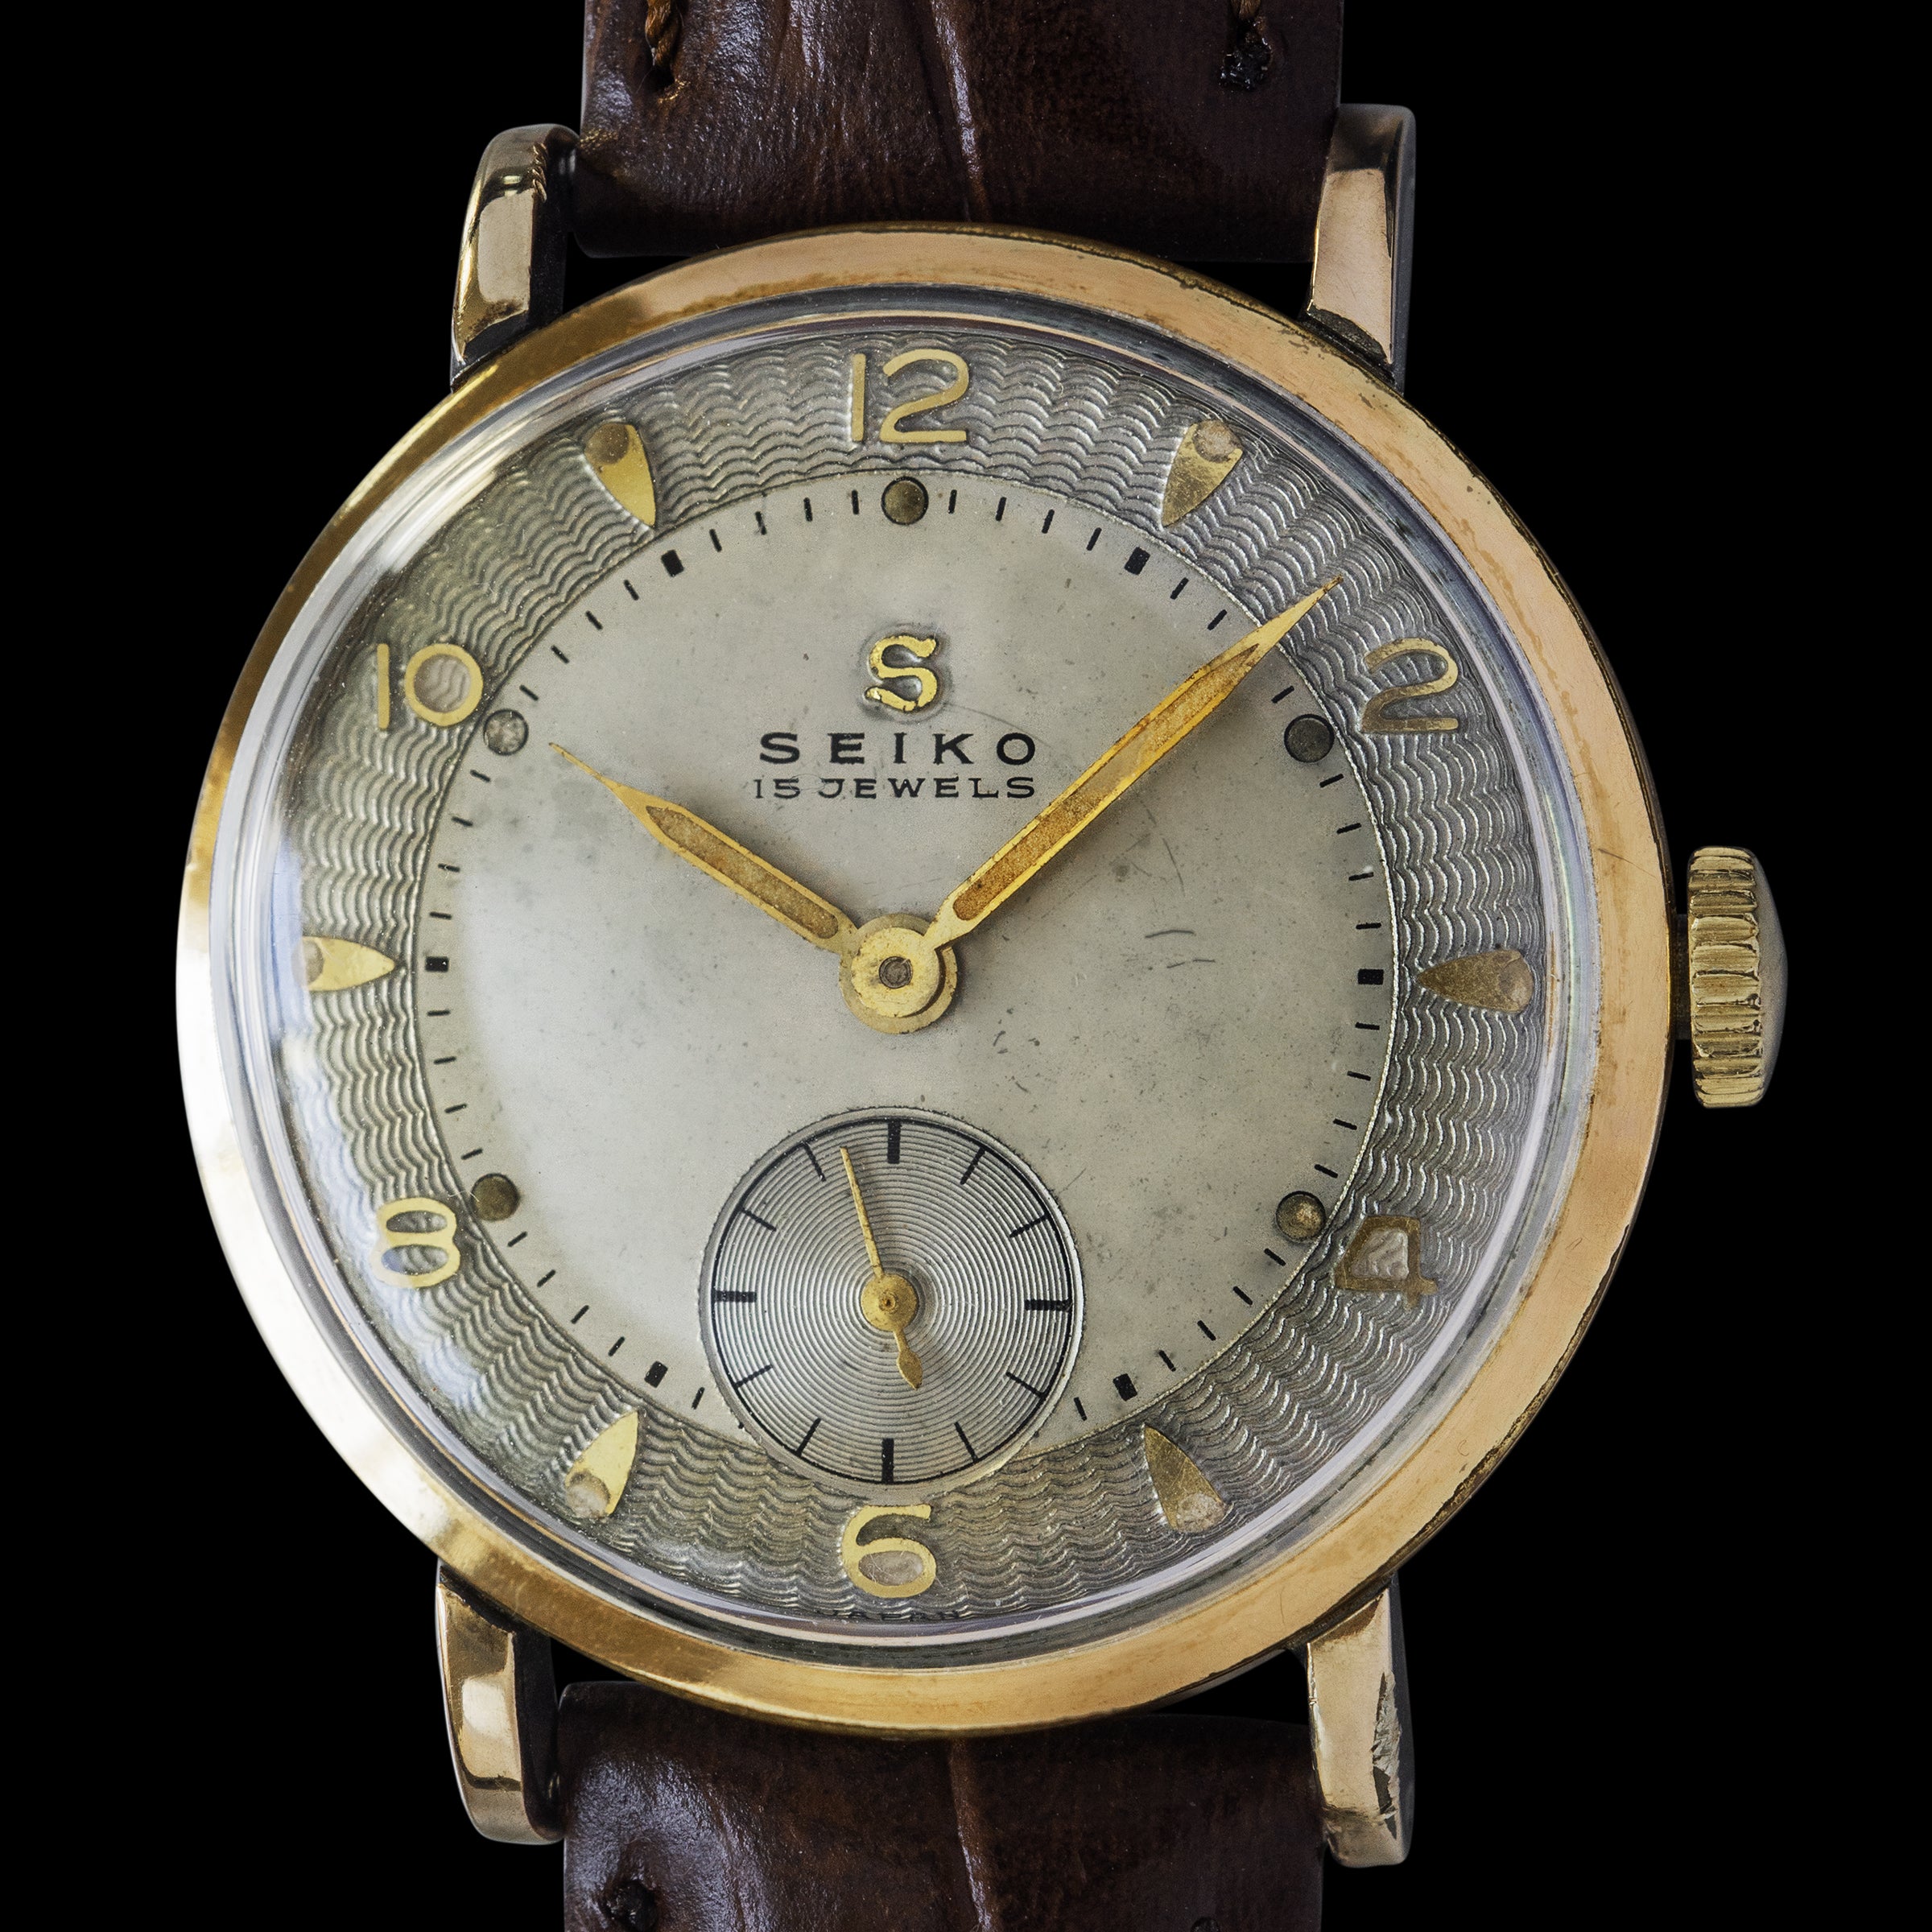 Our vintage watch collection from the Japanese brand, Seiko 